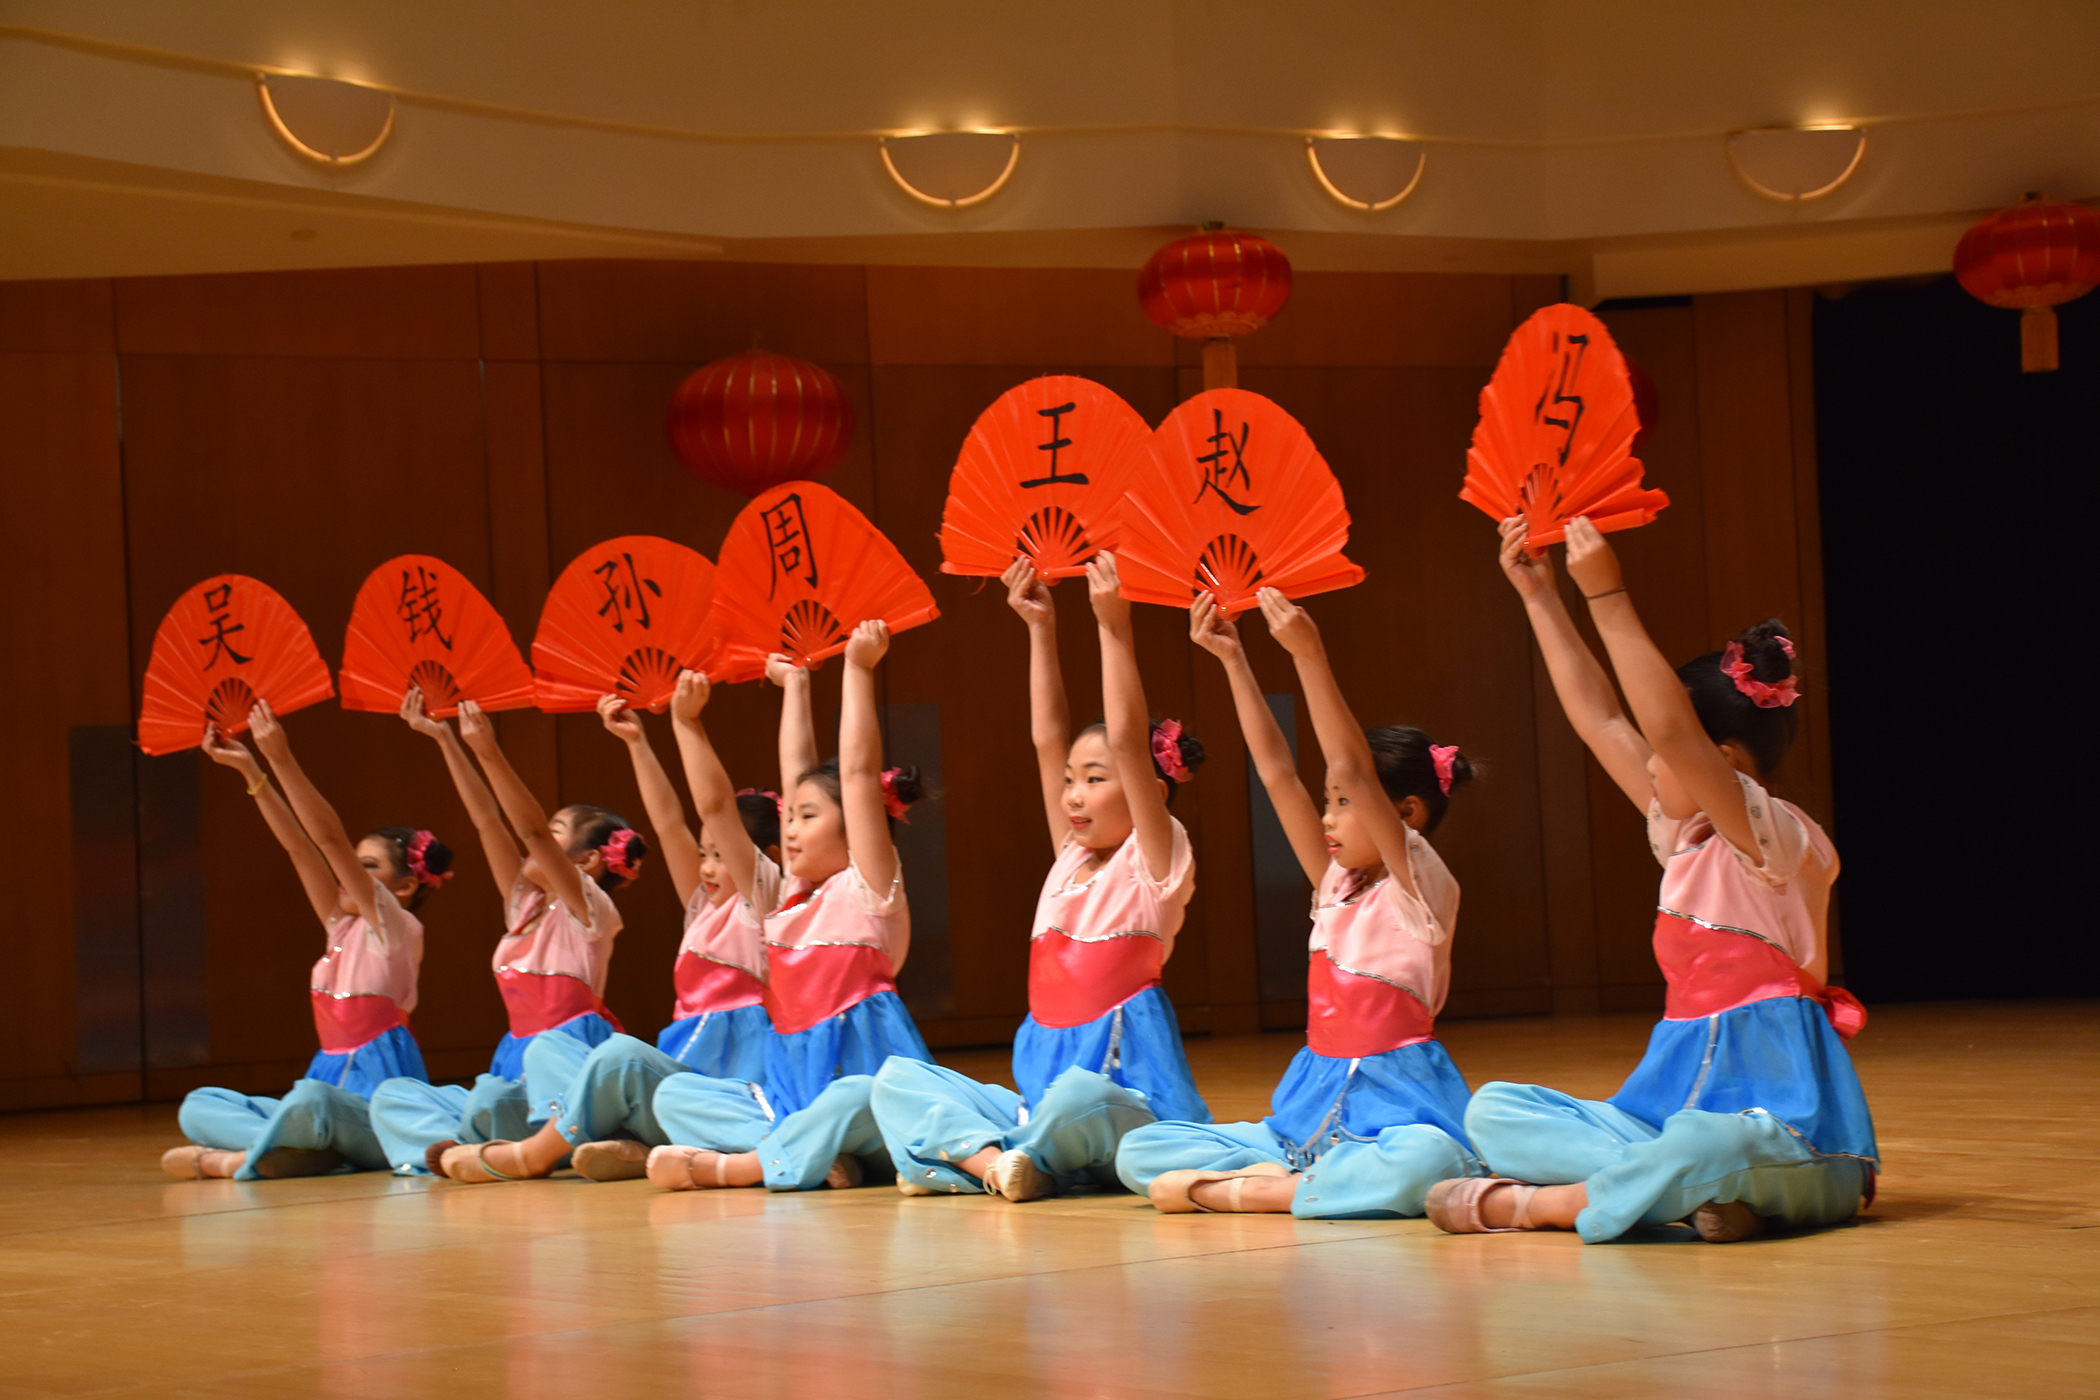 performance from a Chinese dance academy